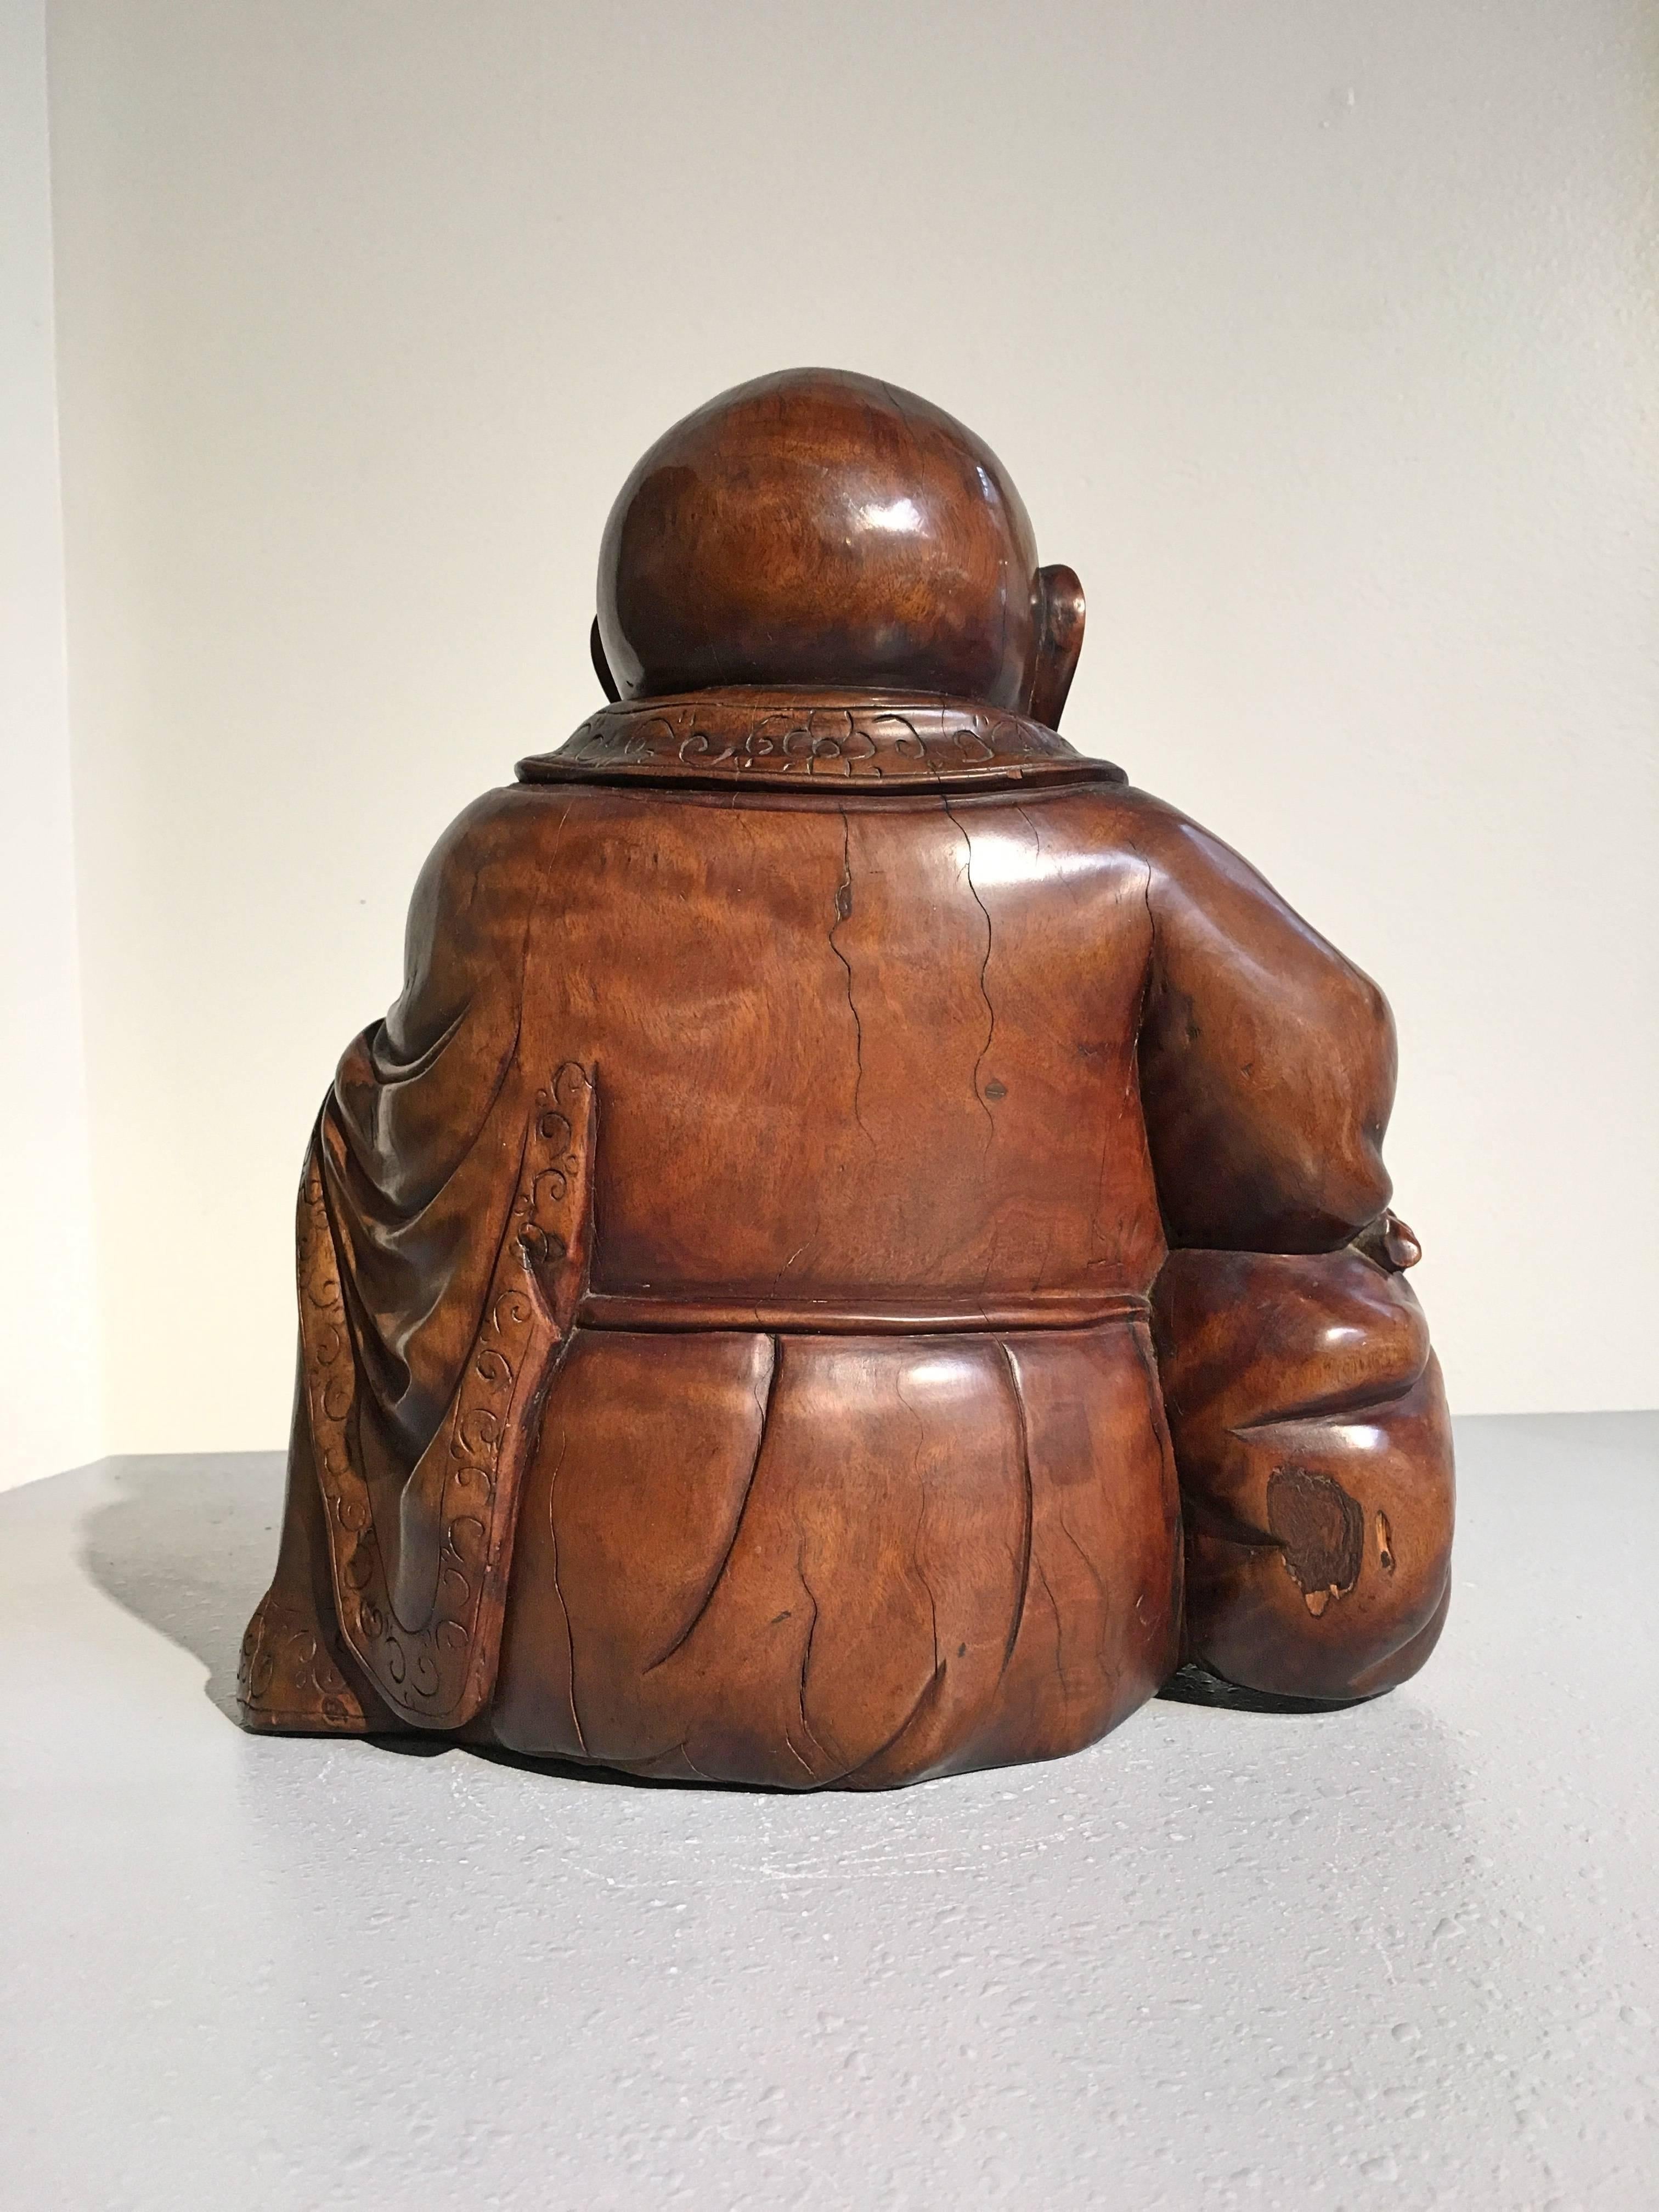 Hand-Carved Chinese Carved Hardwood Figure of Budai, Qing Dynasty, Mid 19th Century, China